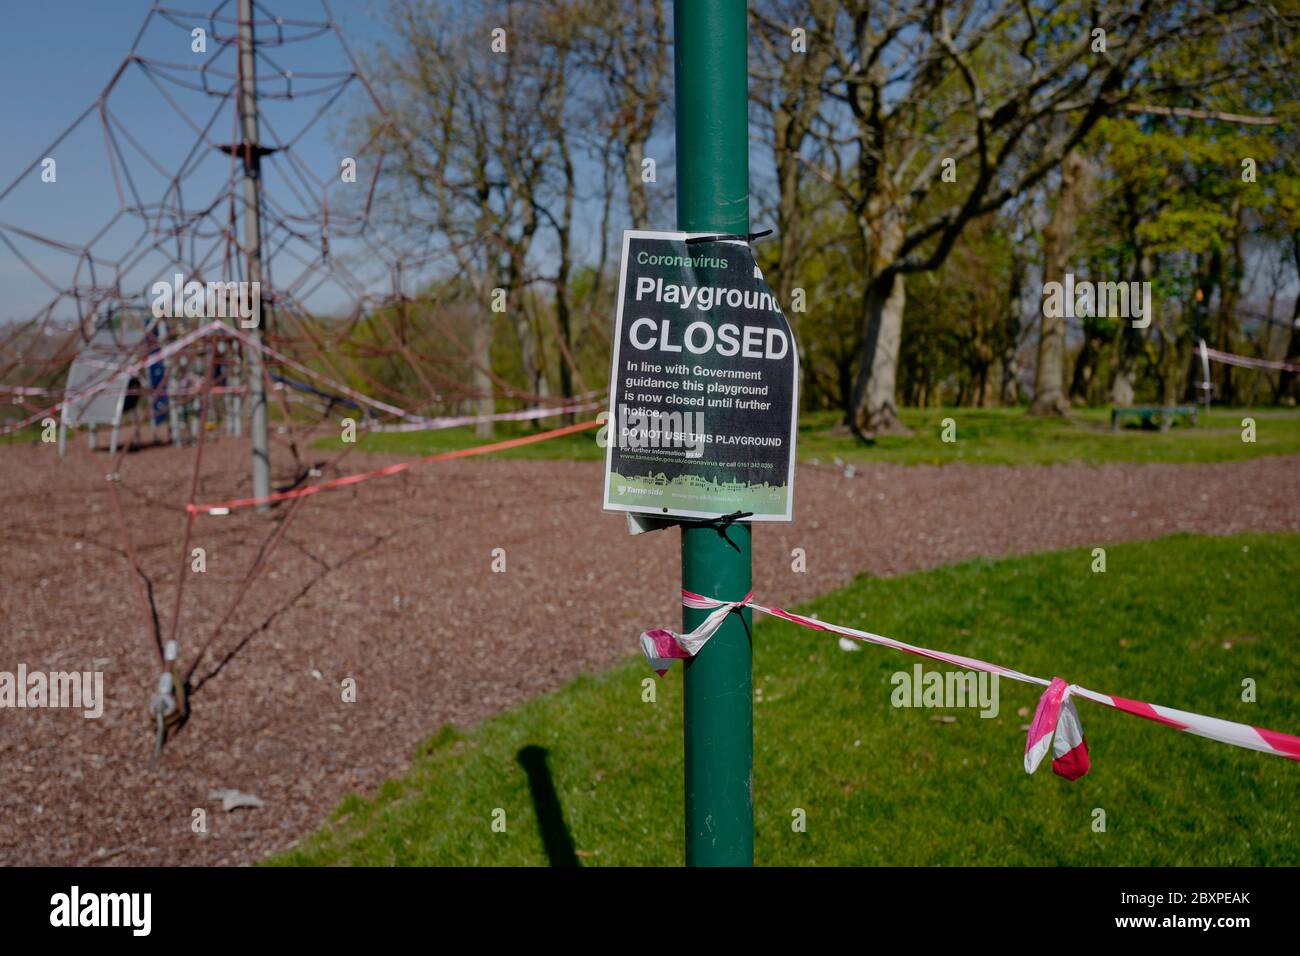 A playground remains closed during the Covid-19 pandemic in Manchester, UK Stock Photo